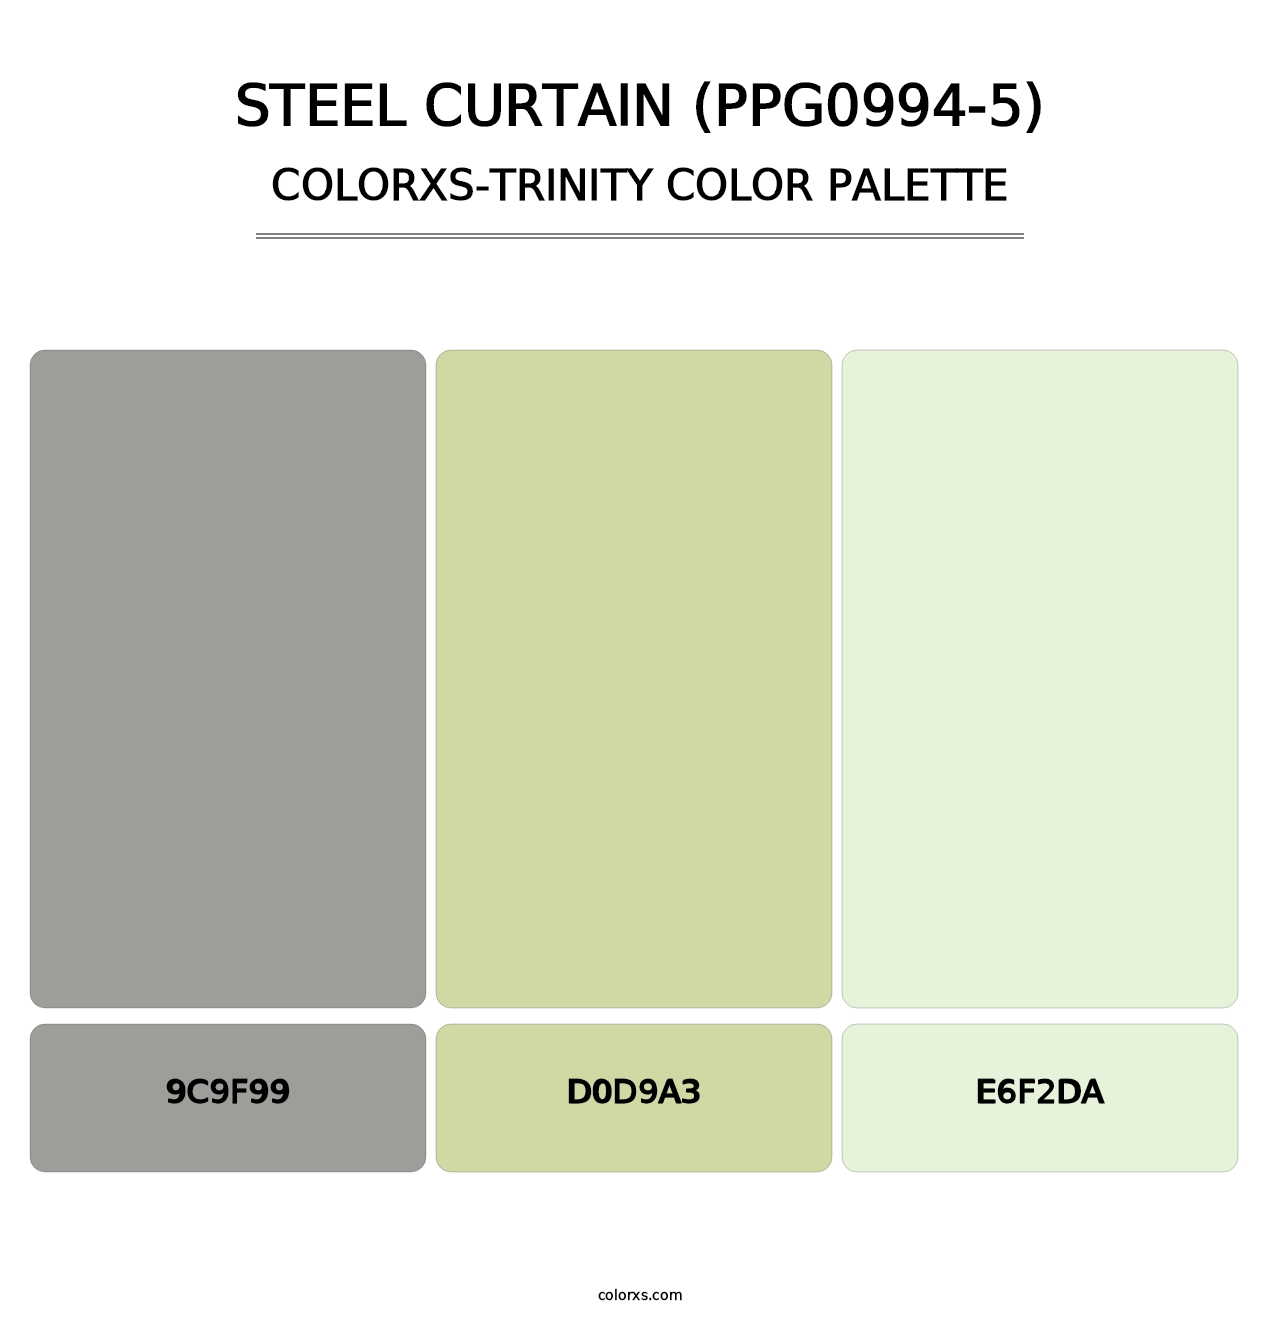 Steel Curtain (PPG0994-5) - Colorxs Trinity Palette